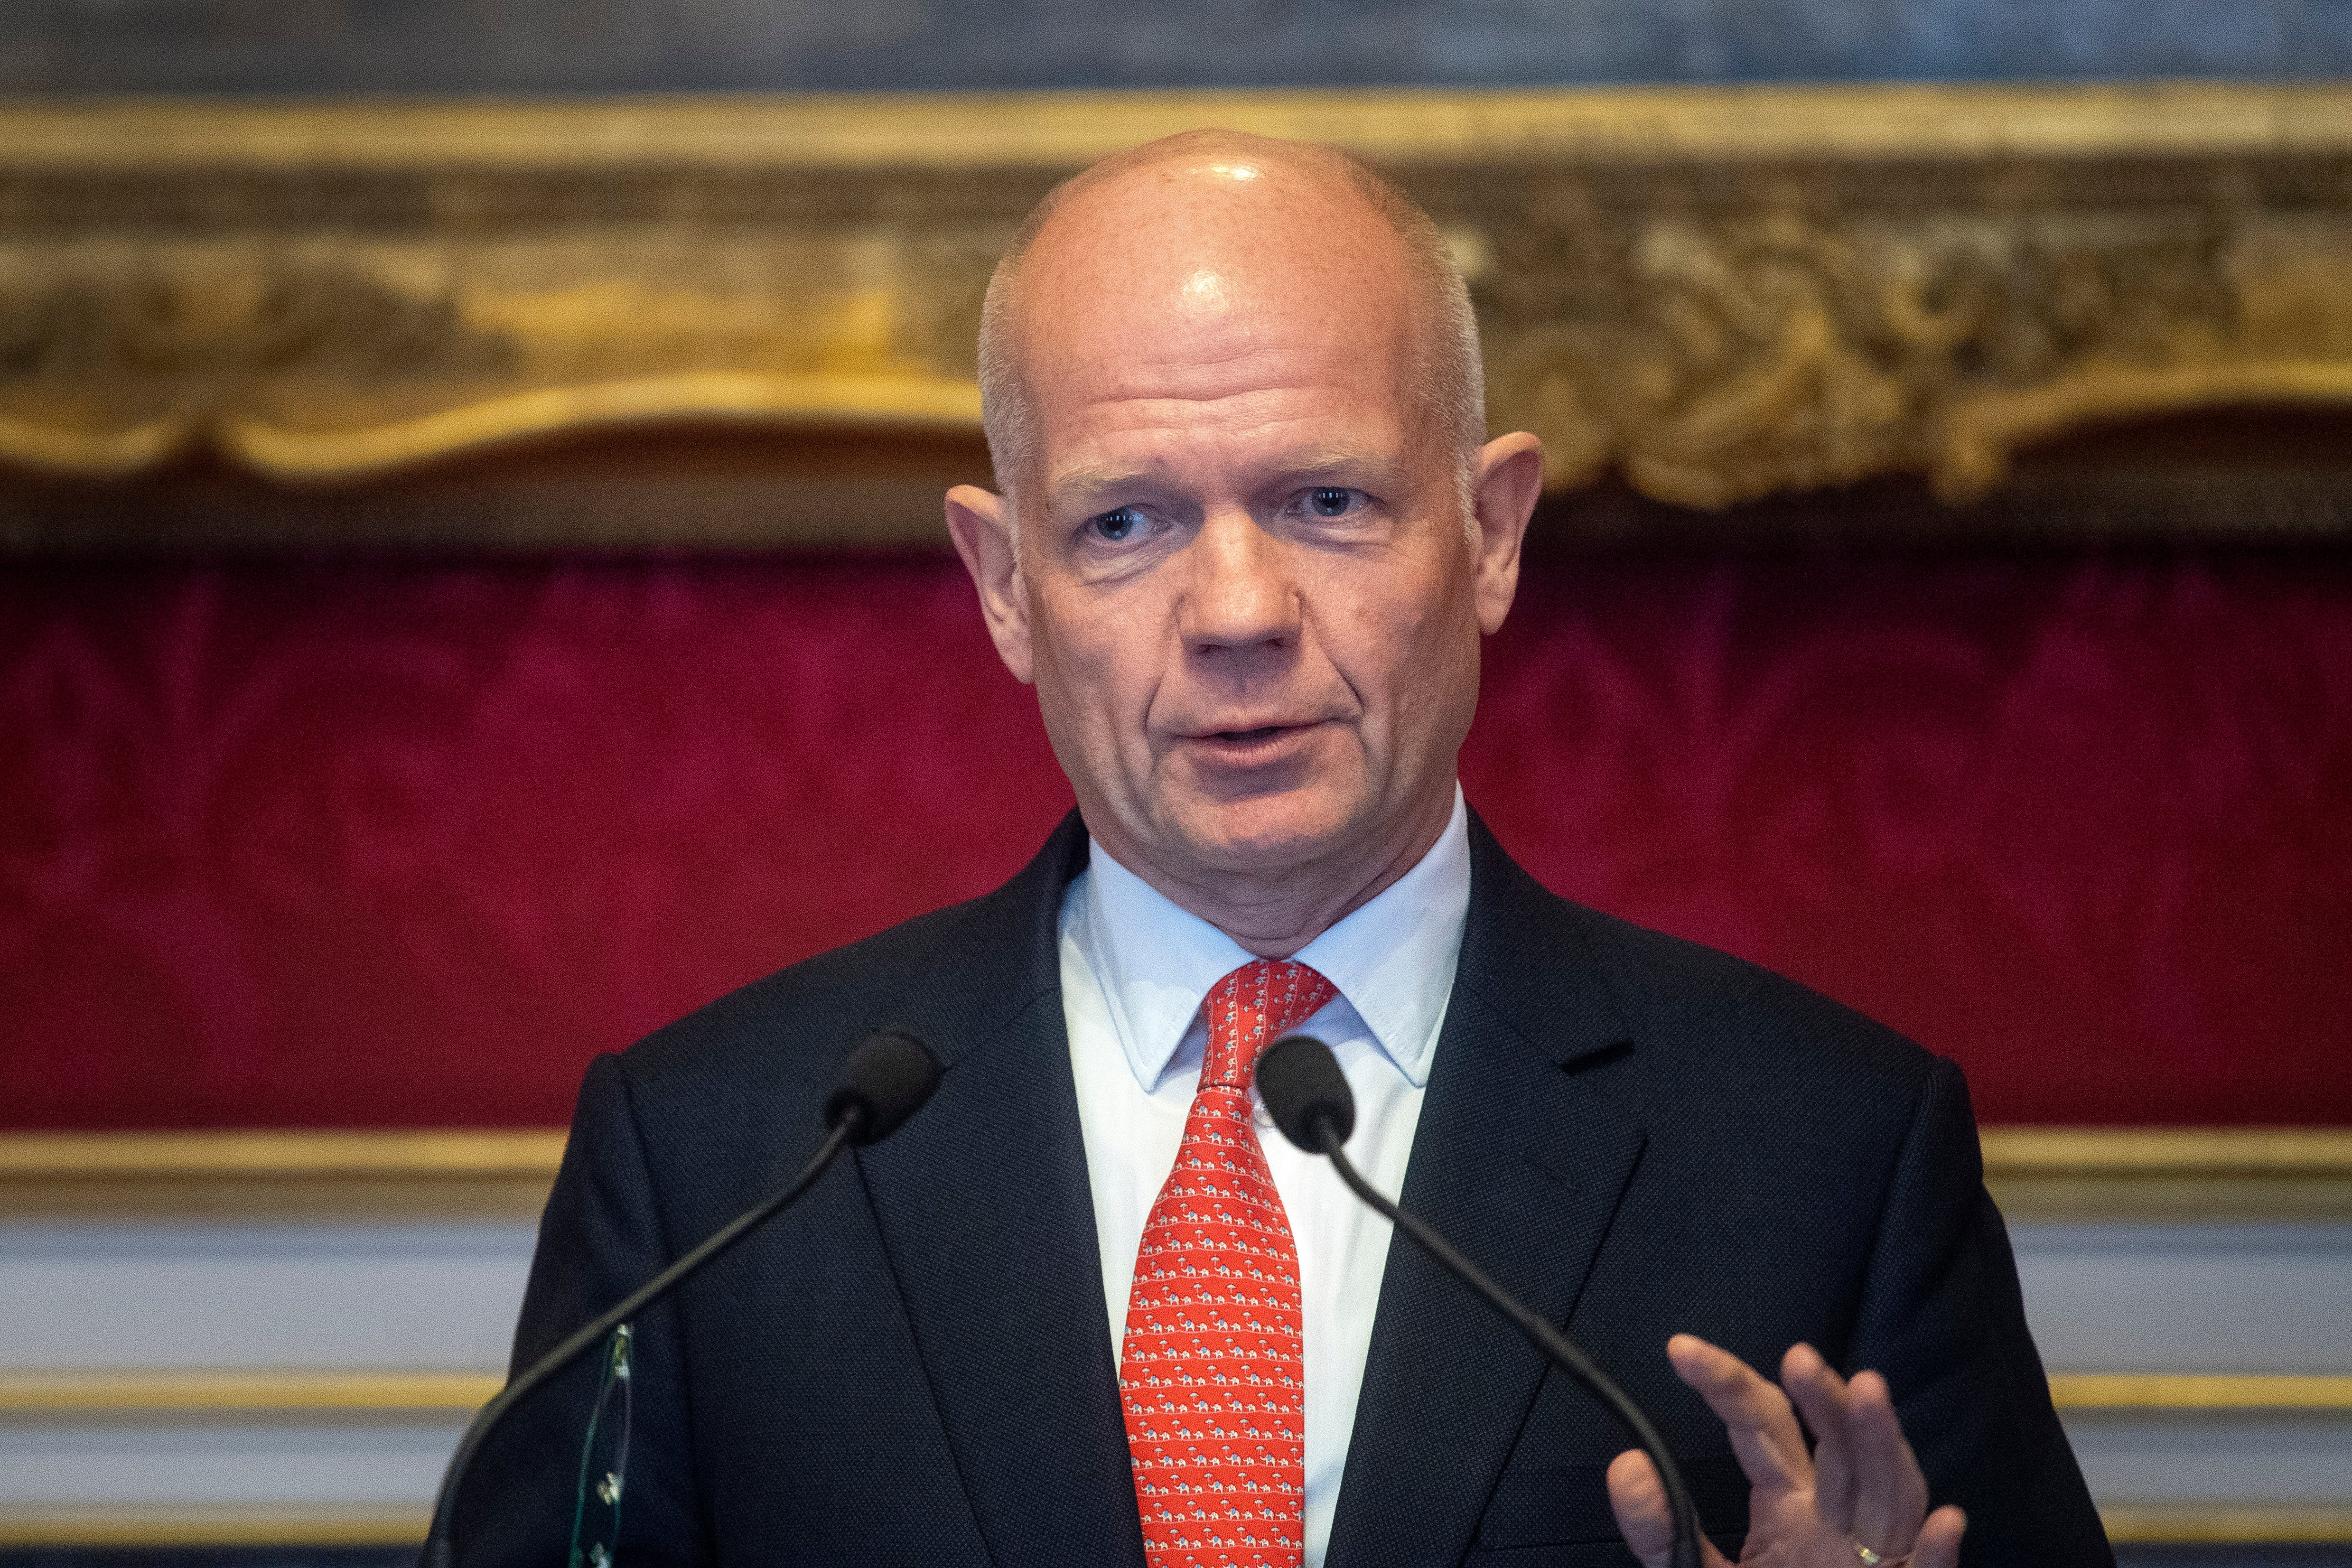 Lord Hague said big firms should ‘get over and get used to’ transgender women trying to join